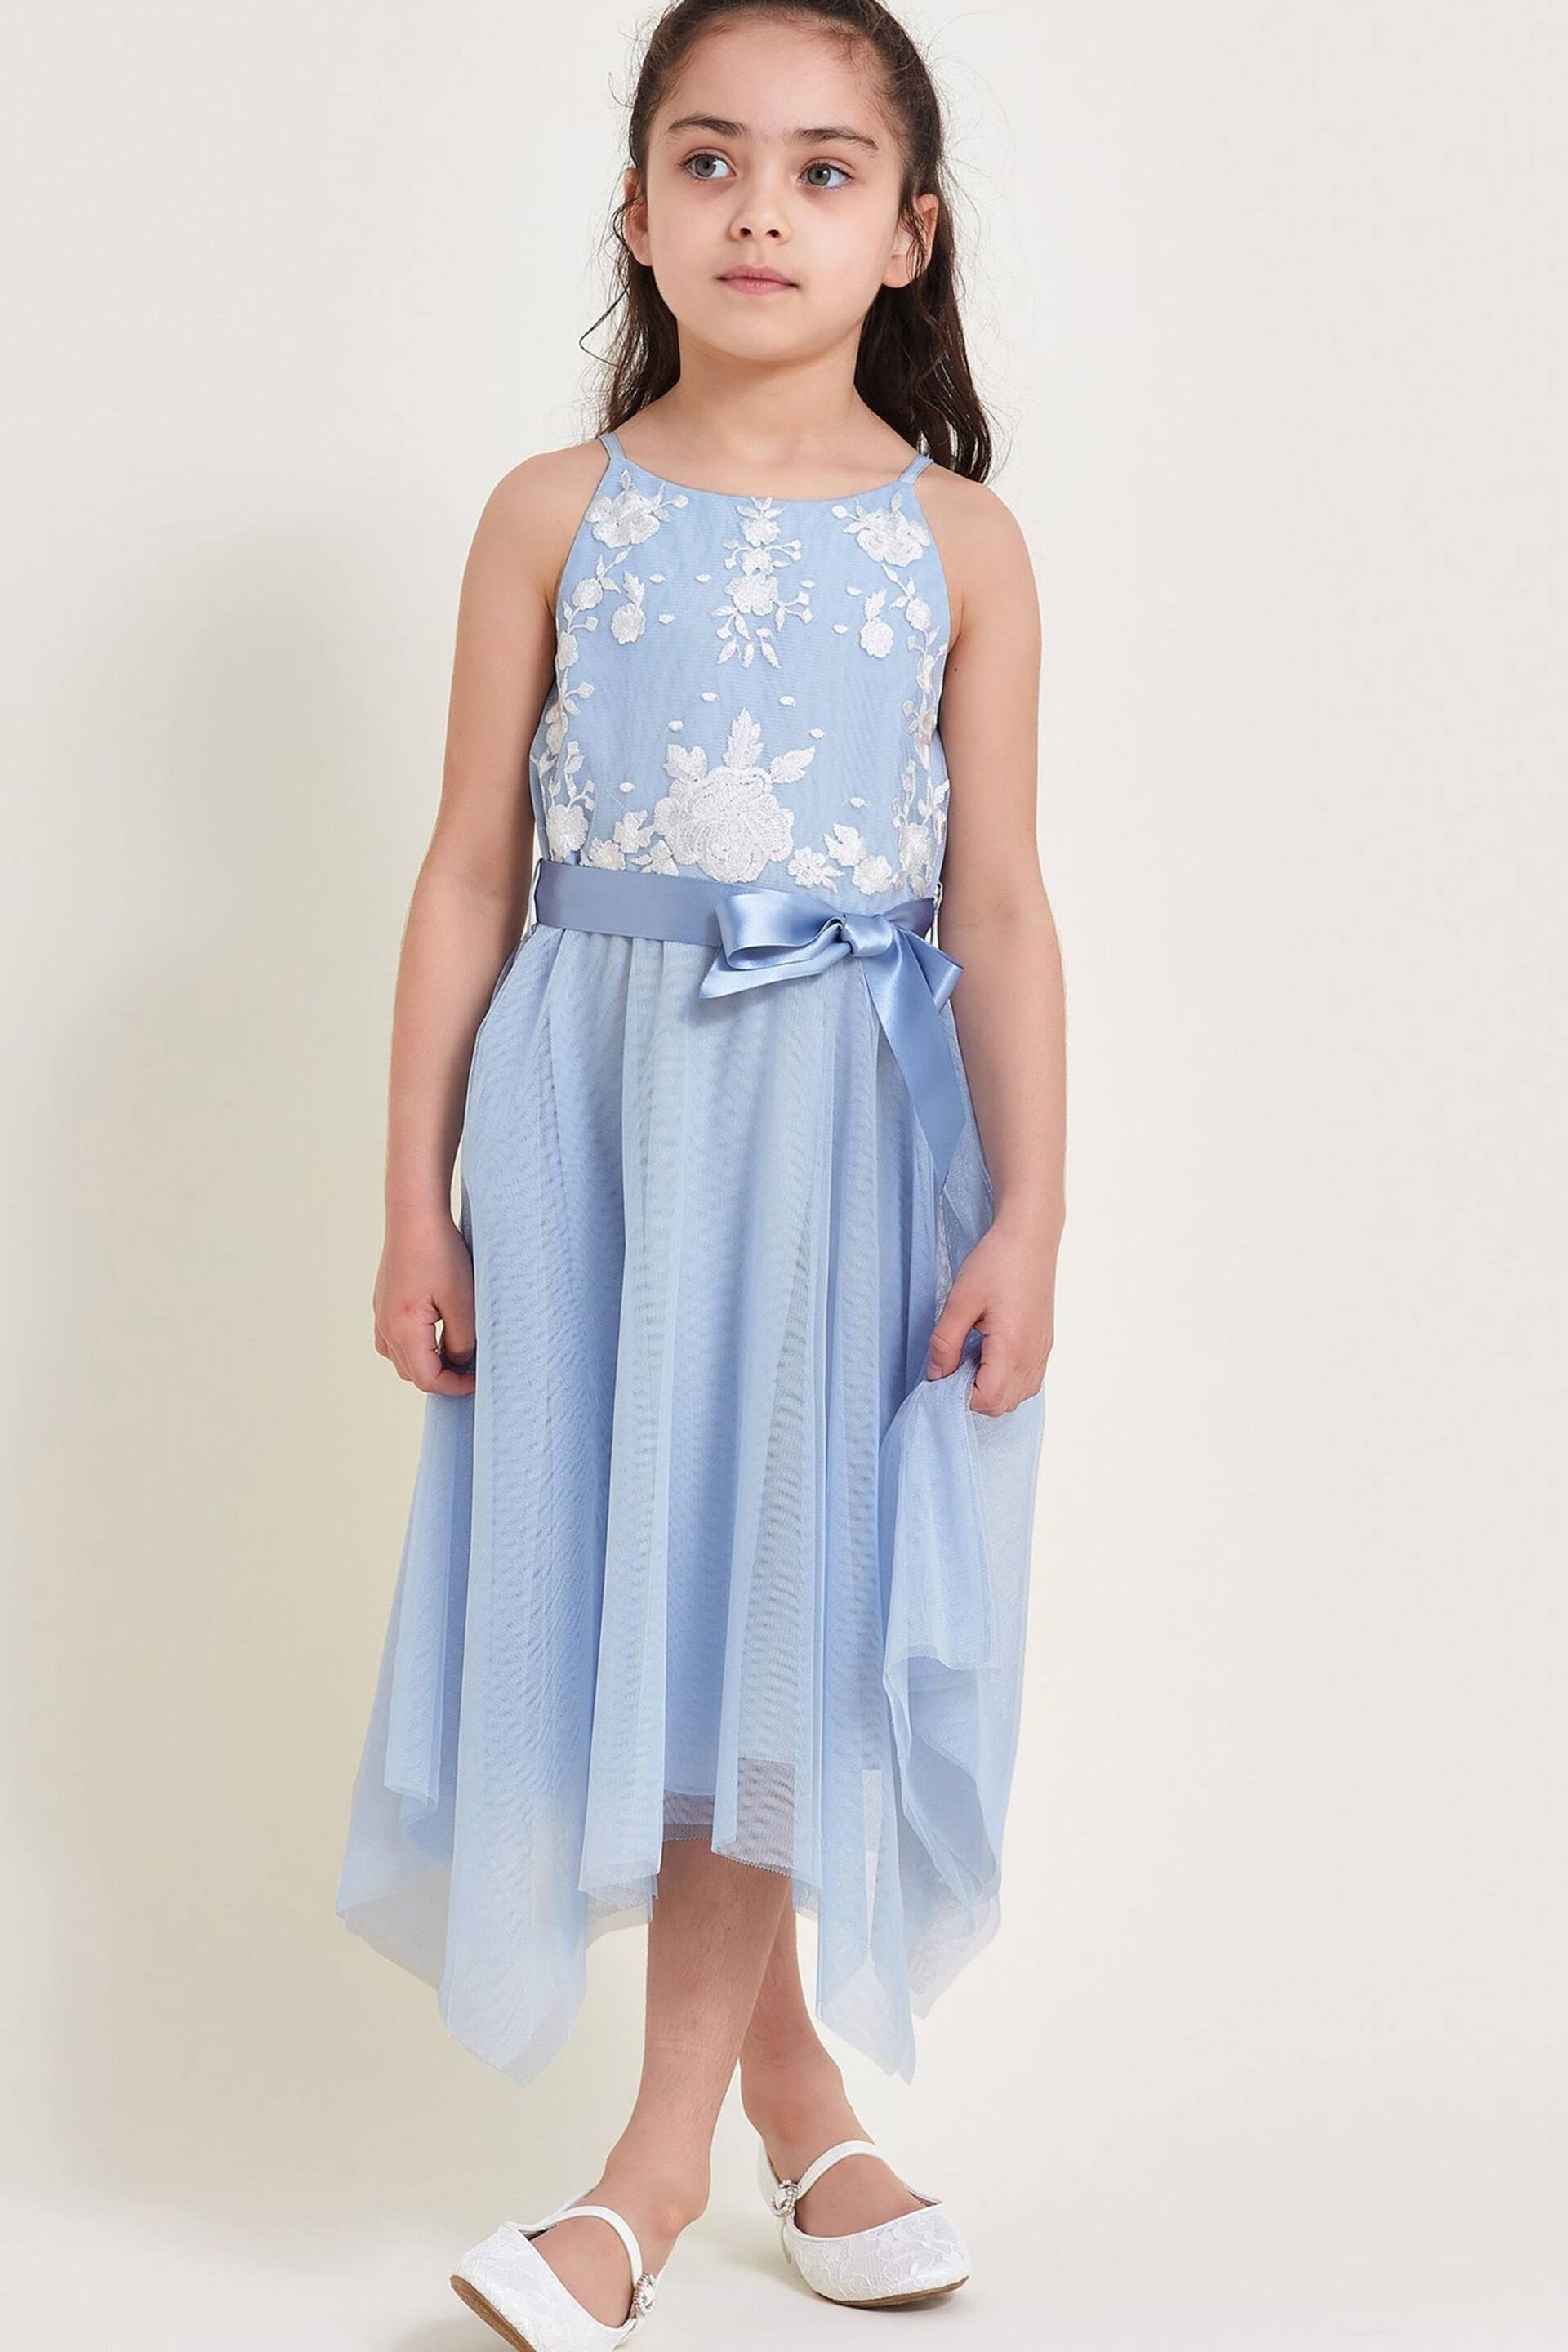 Monsoon Blue Truth Embroidered Dress - Image 1 of 4